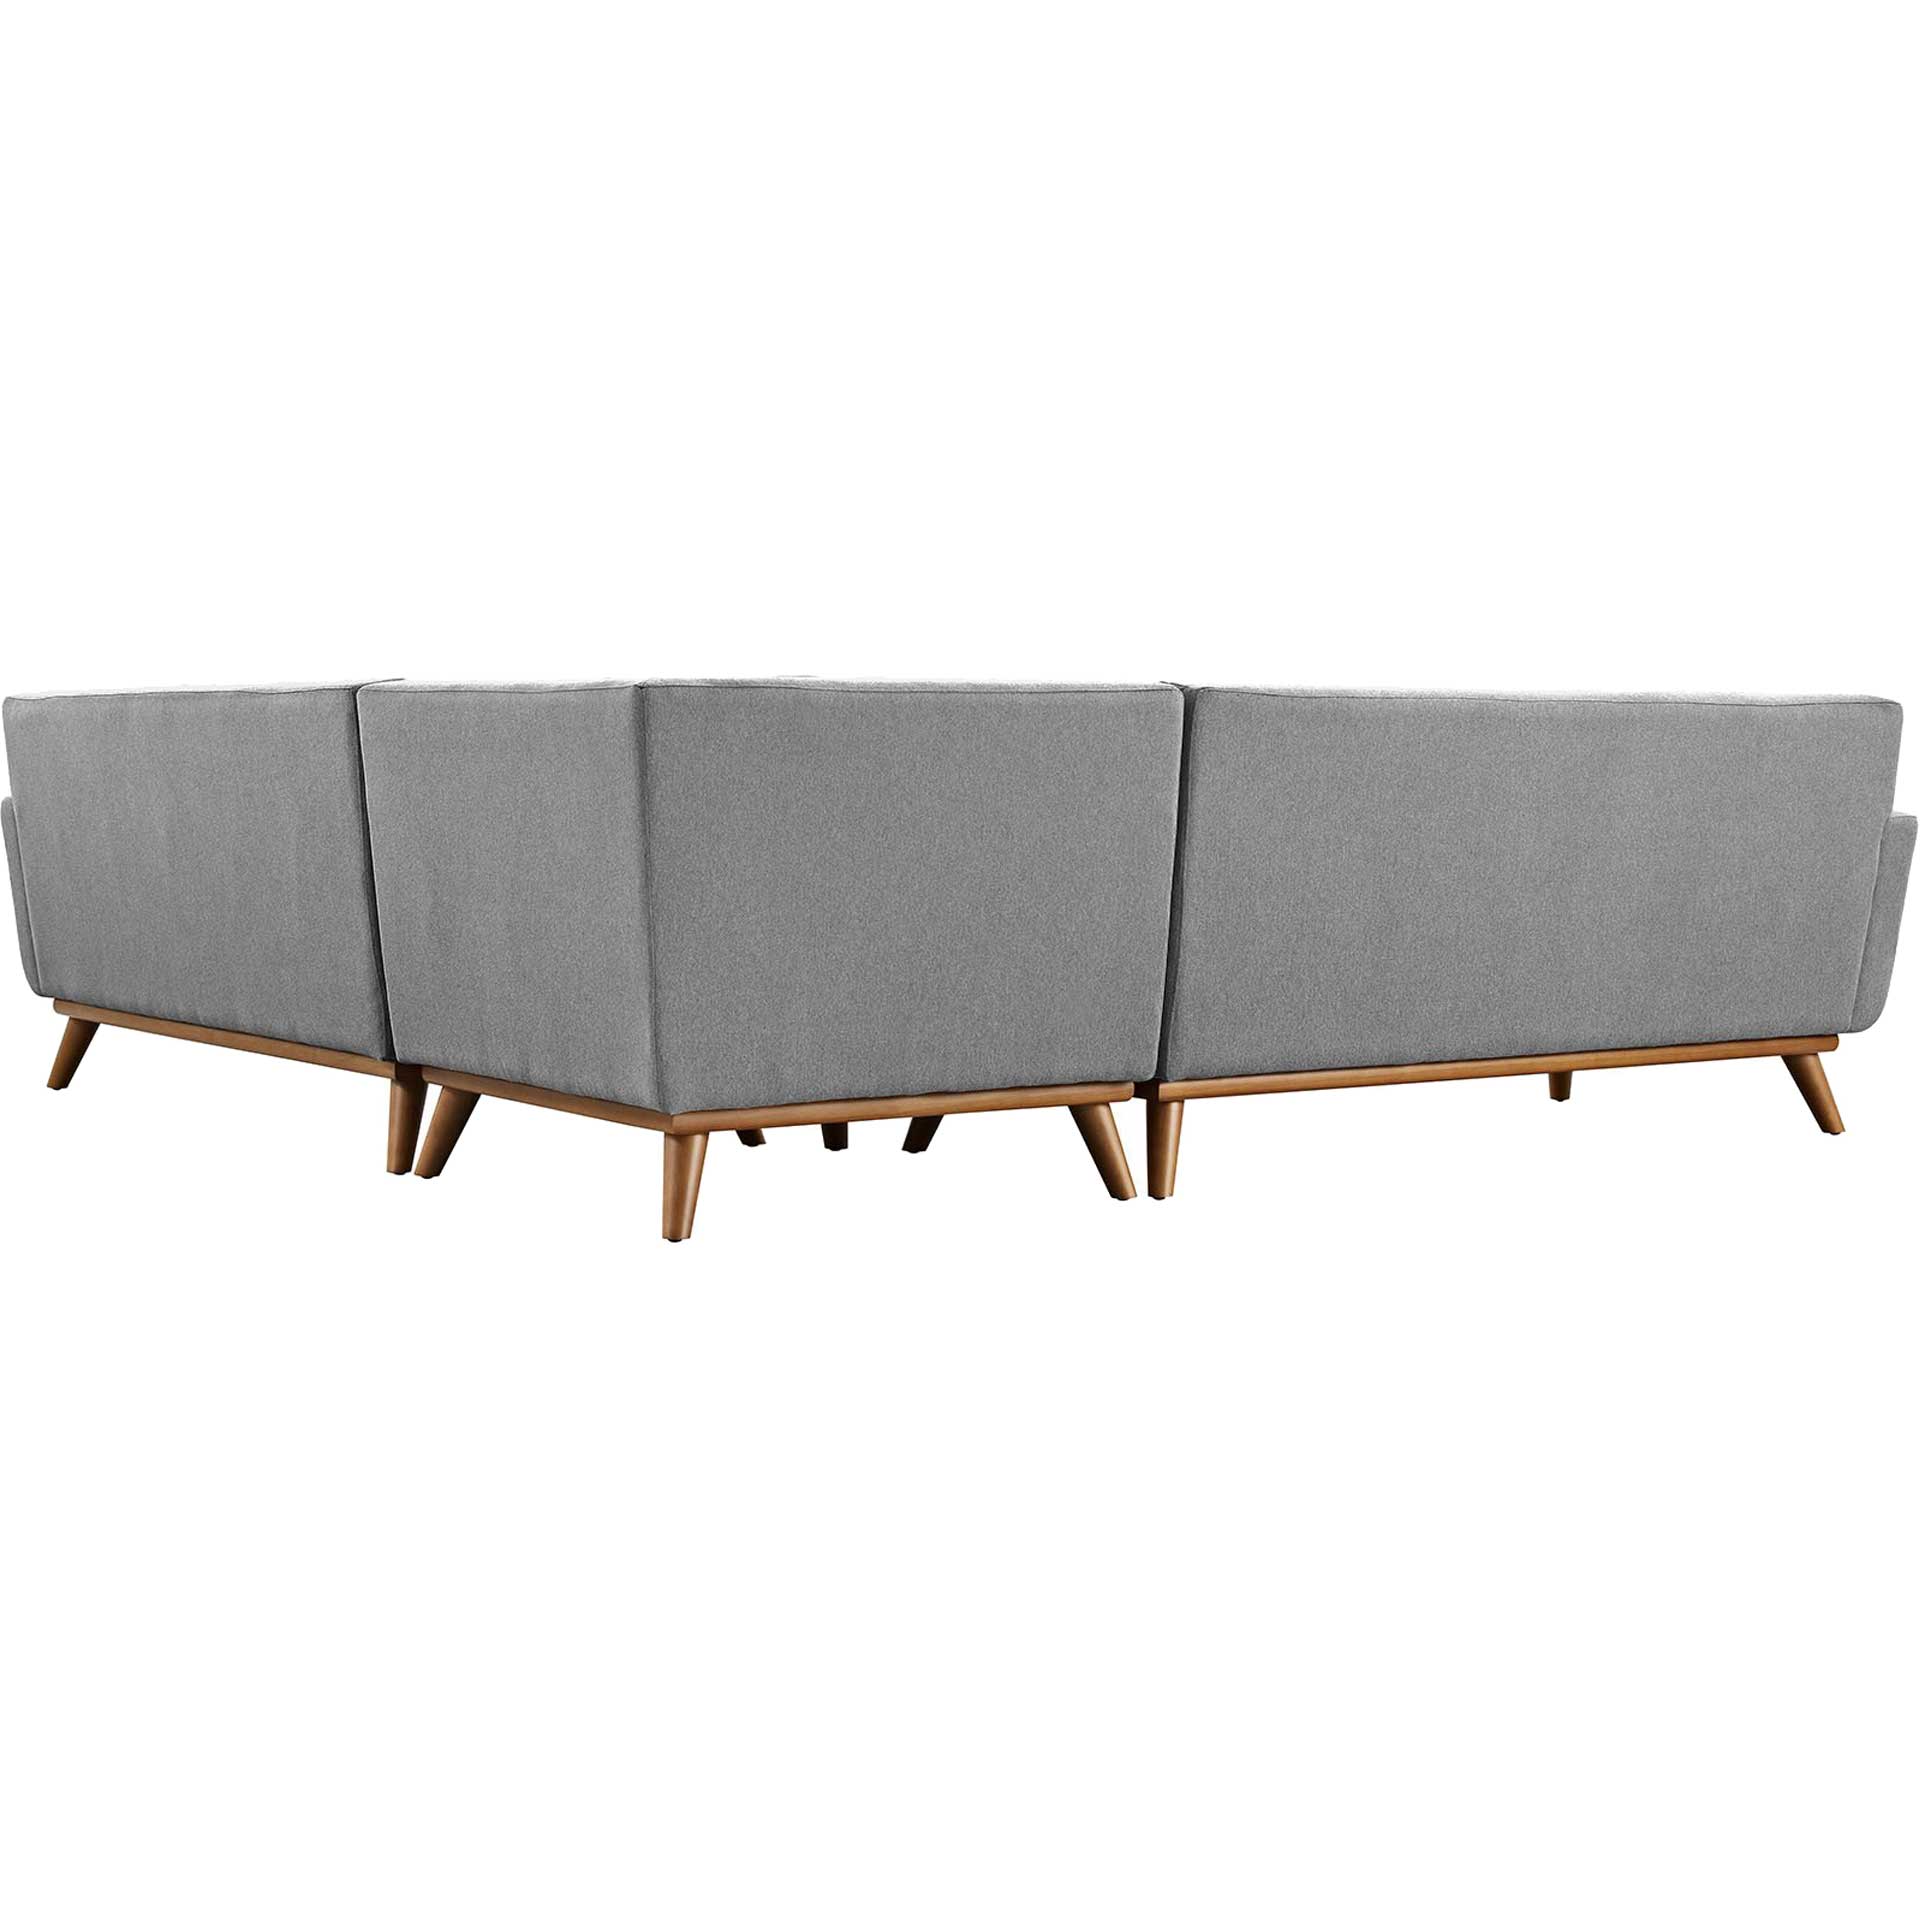 Emory L-Shaped Sectional Sofa Expectation Gray